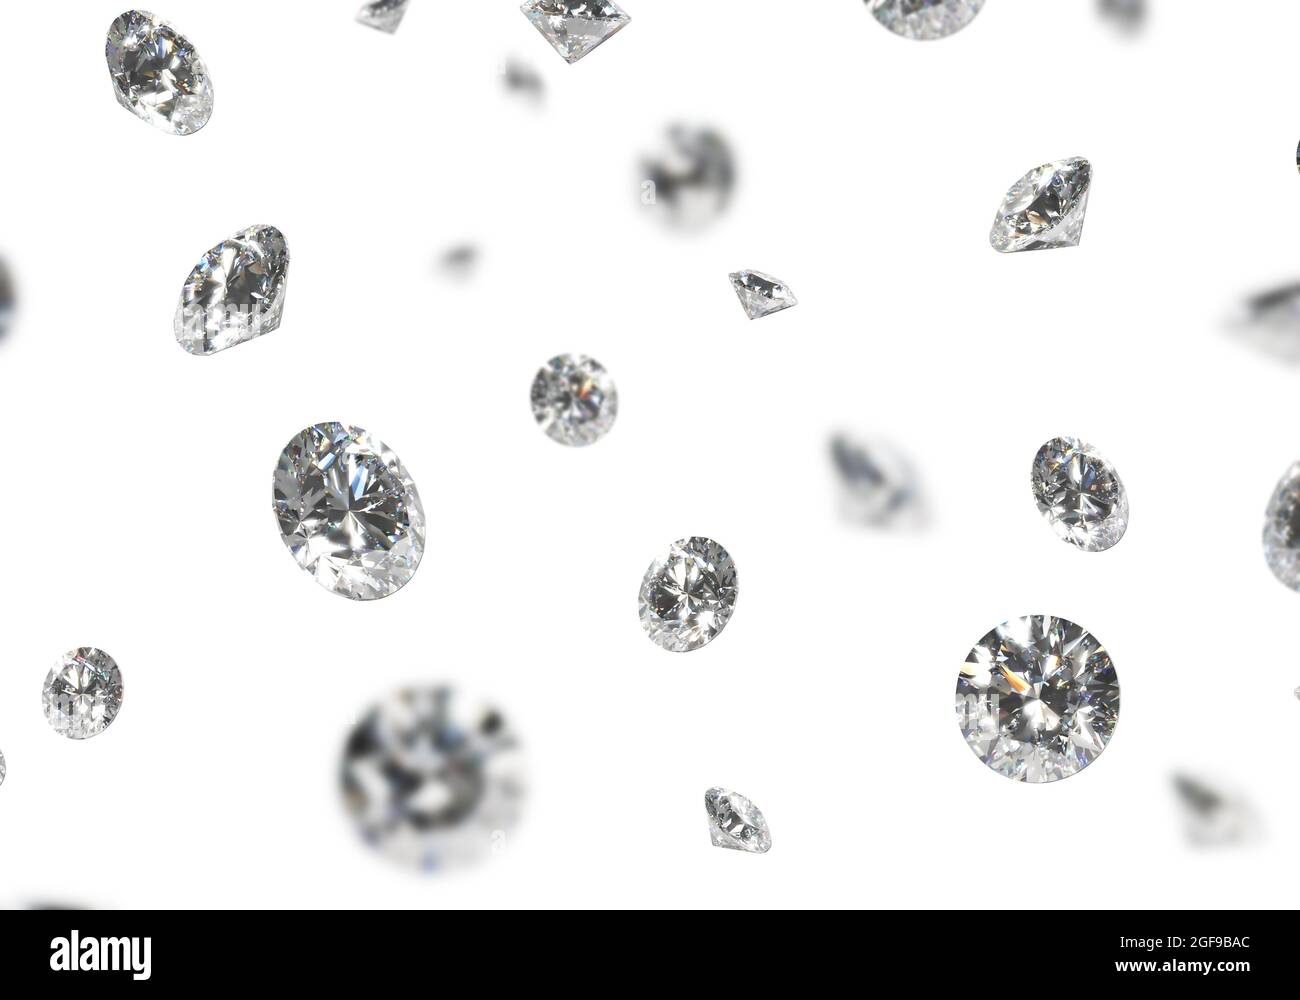 Beautiful Shiny Diamond in Brilliant Cut on White Background,- Crystal ...